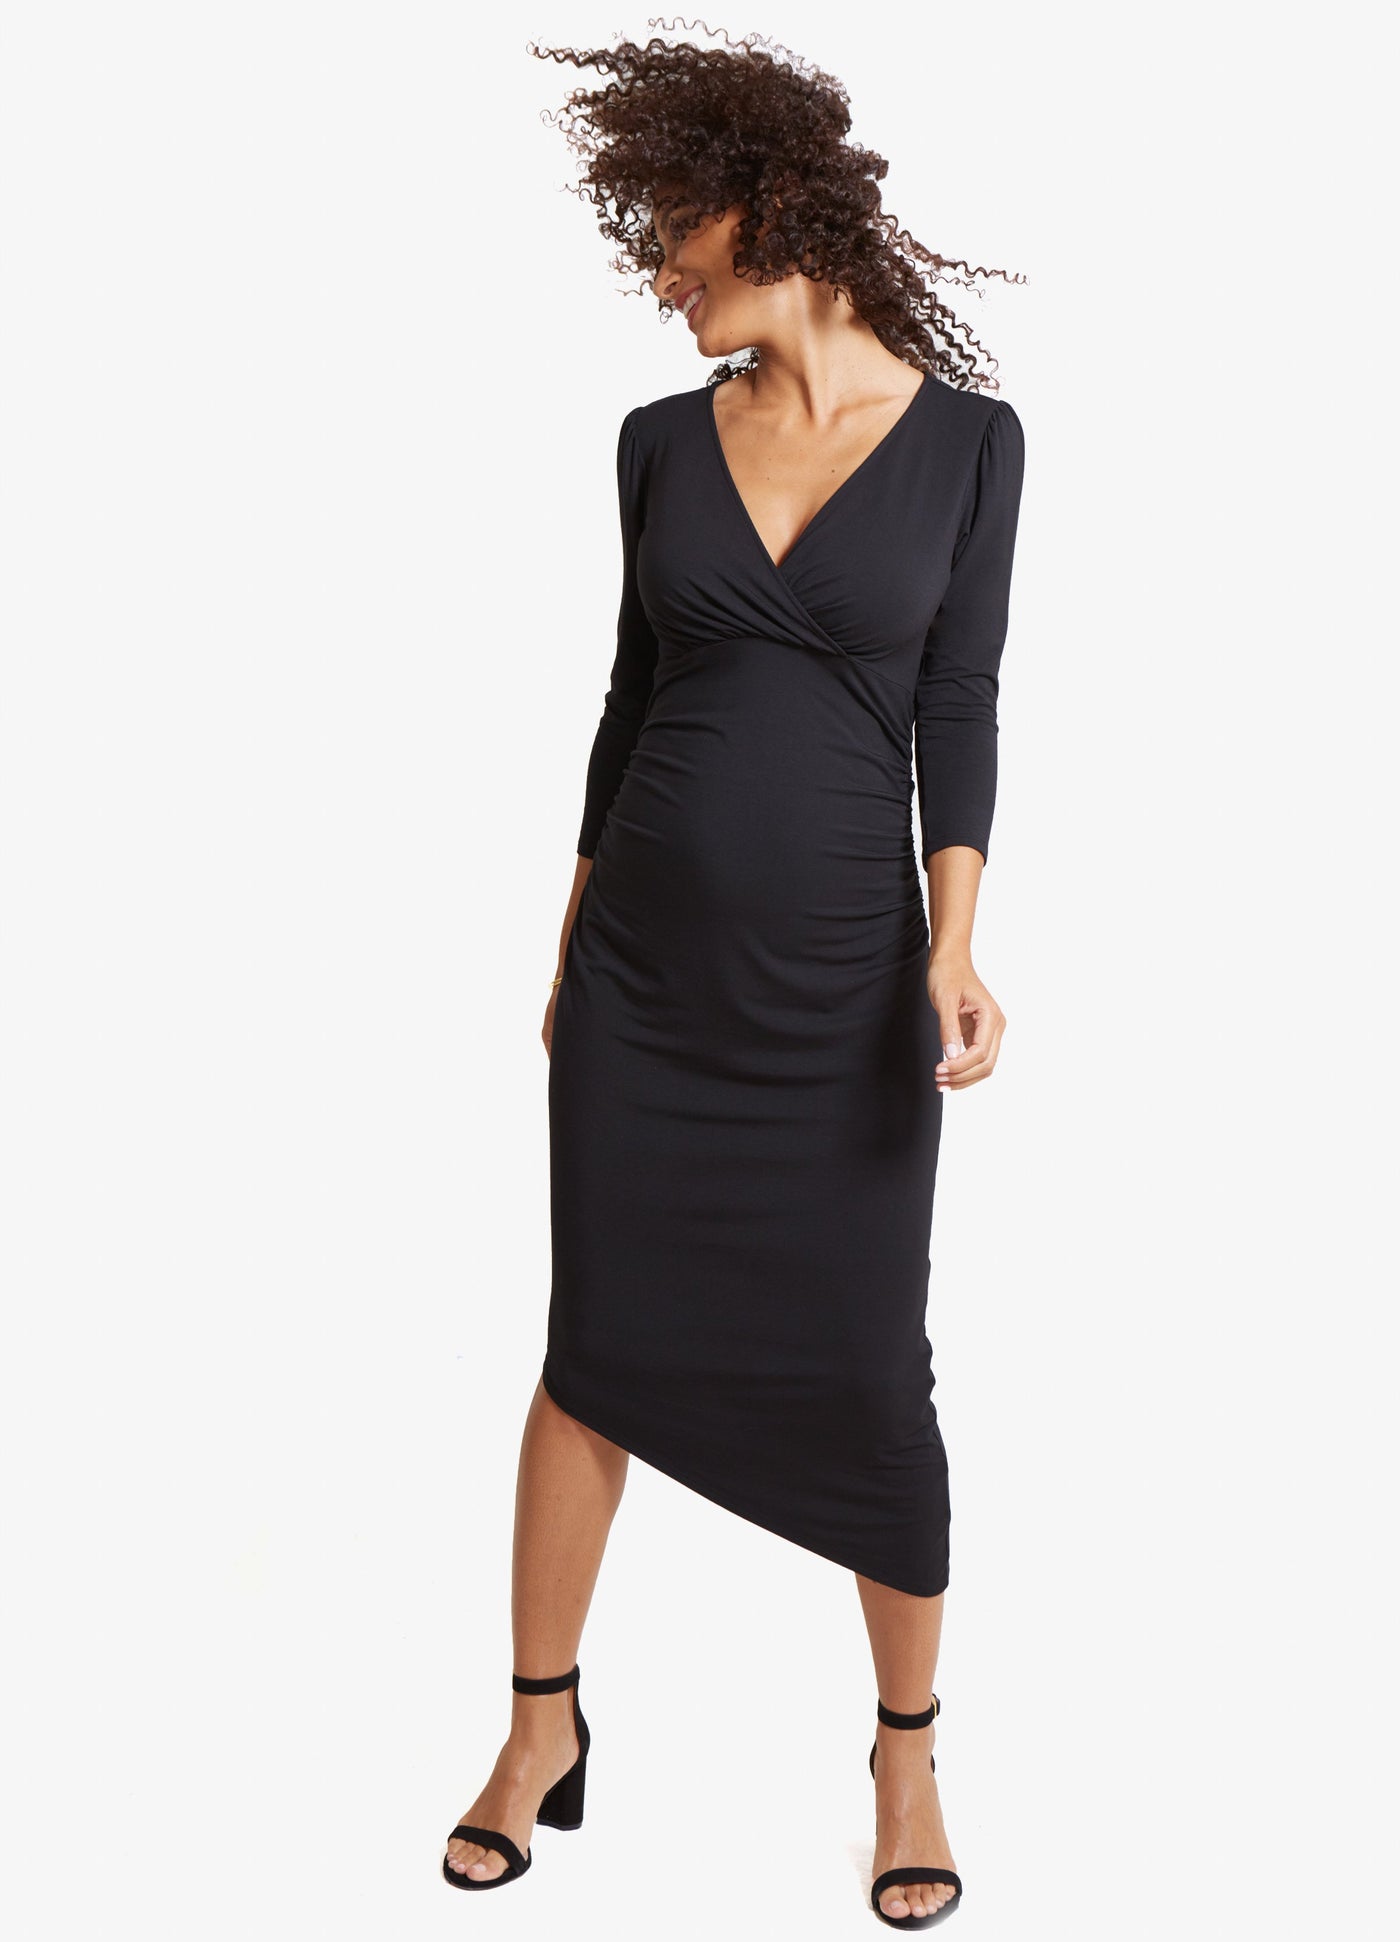 Model is 5’10”, 4 months pregnant, and wears size S.||Black